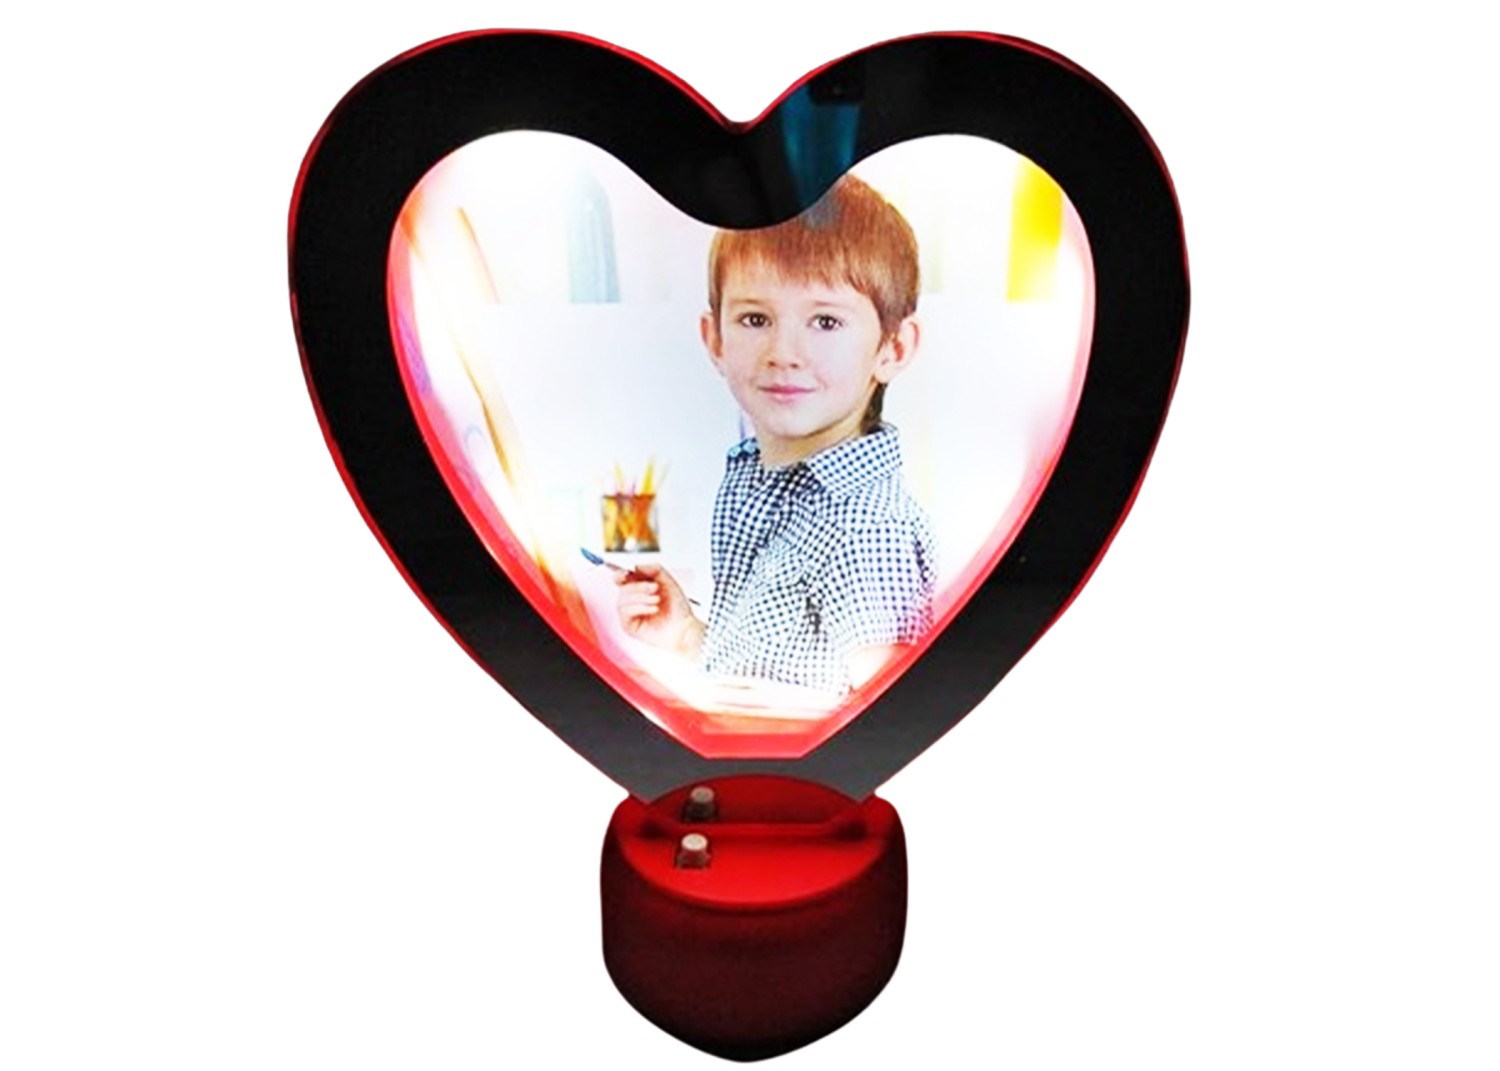 Heart Shape Magic Mirror Photo Frame with Light Photos Gift Frames for Valentine’s Day Gifts, Anniversary, Birthday and Home Decor